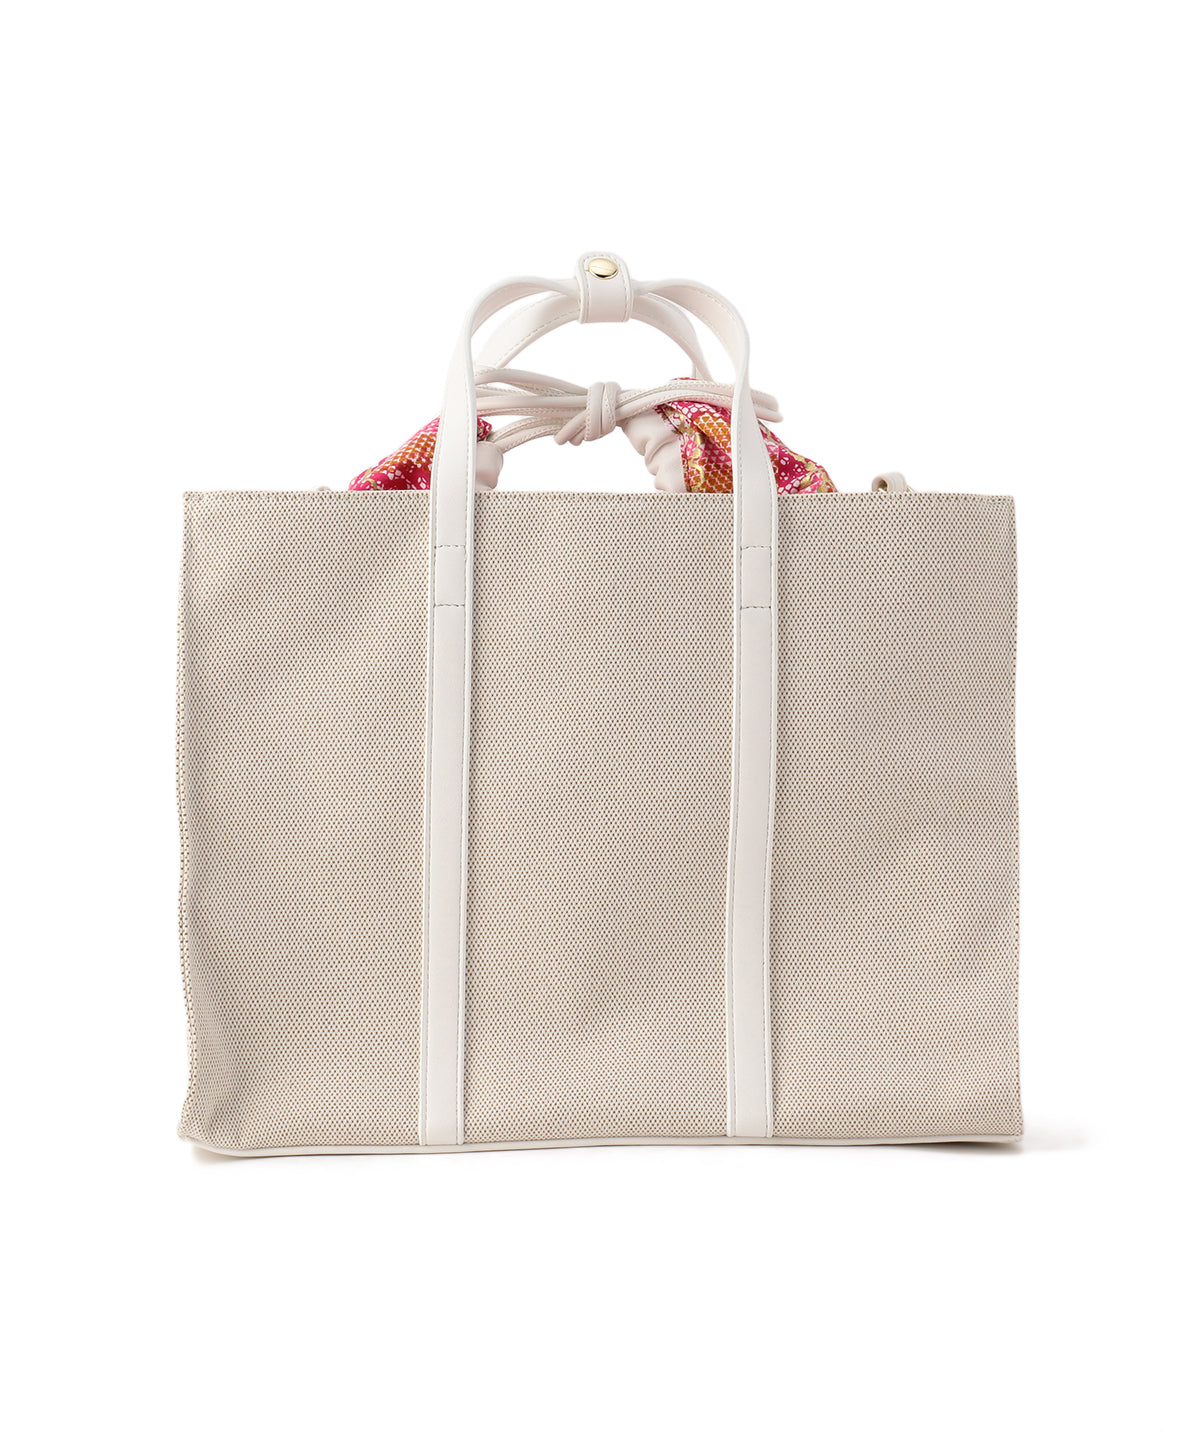 Square canvas tote Medium WHITE | バッグ | CLOUDY公式通販サイト